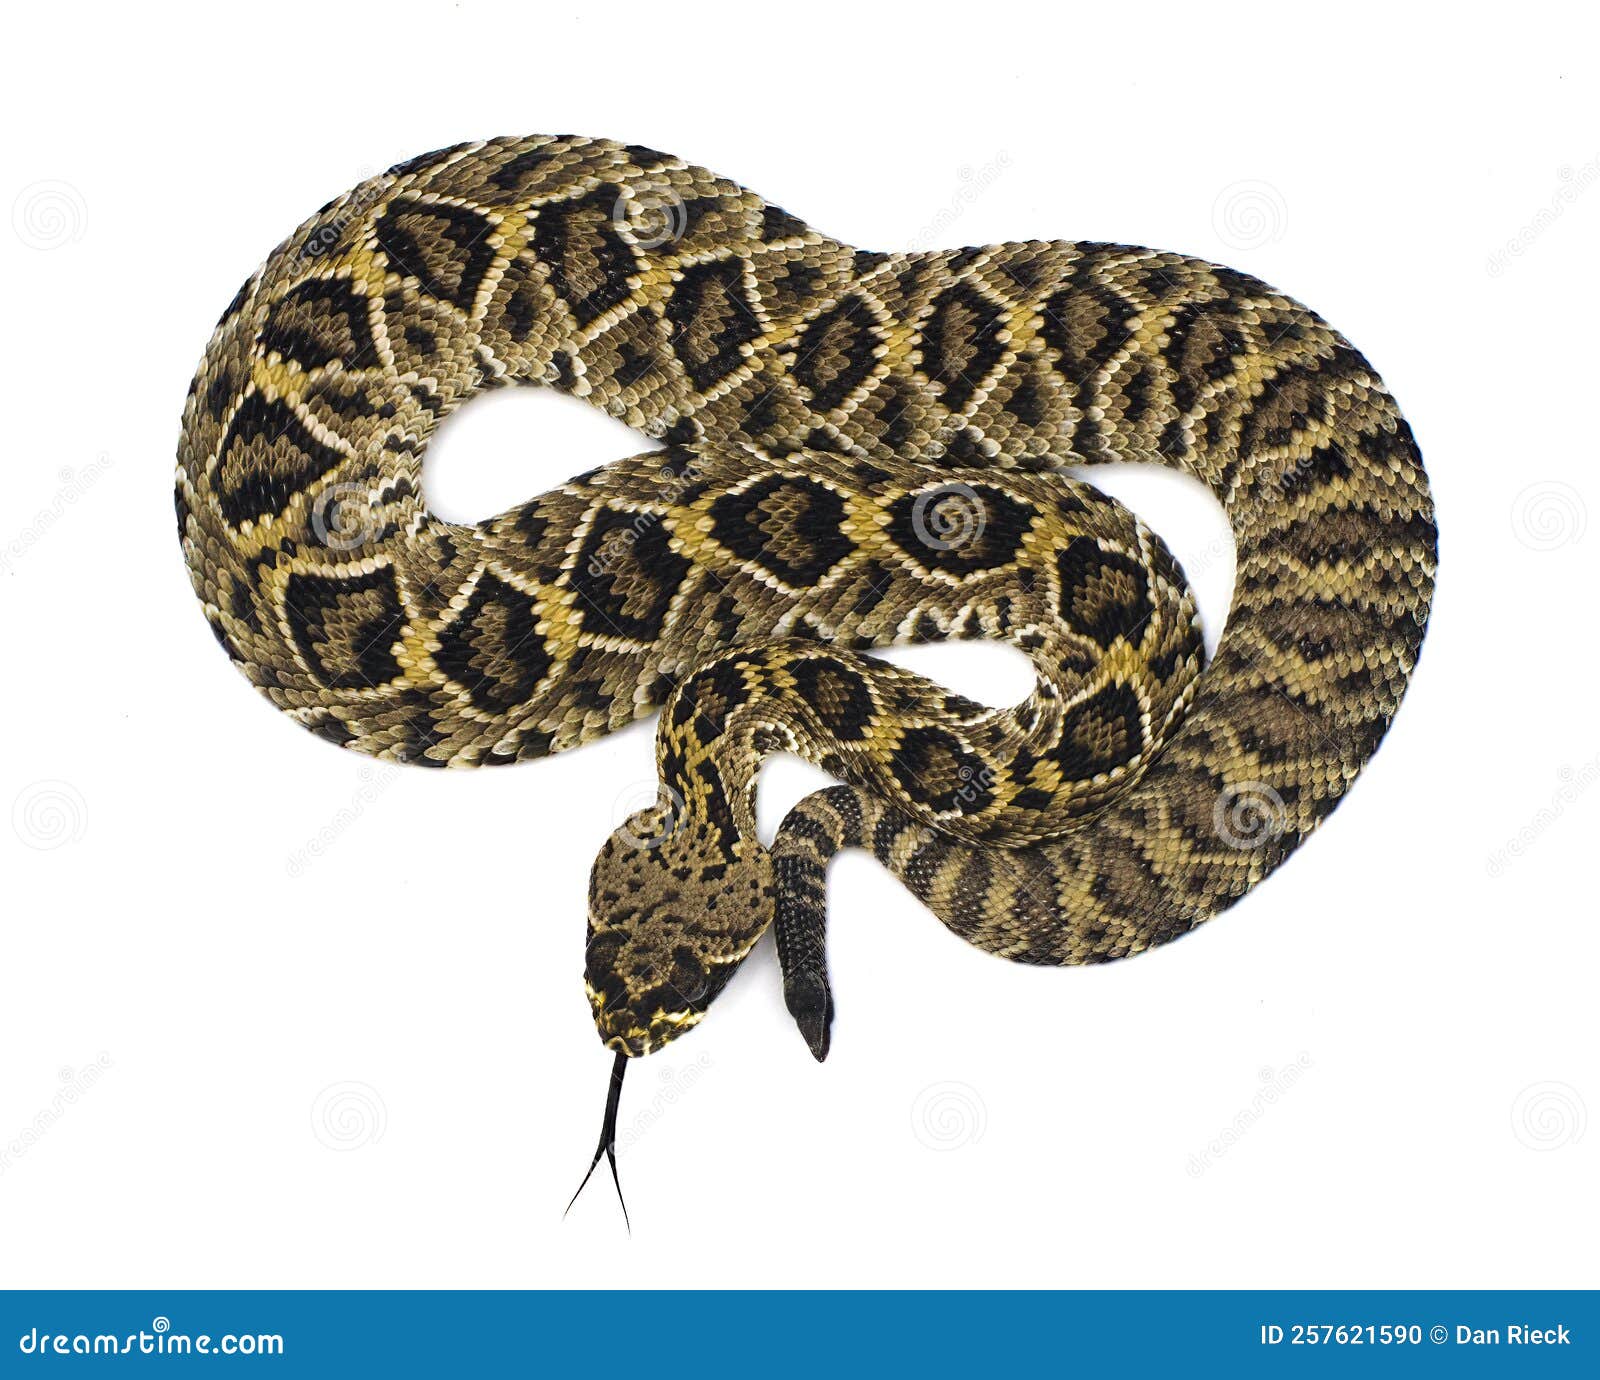 eastern diamondback rattlesnake - crotalus adamanteus  on white background dorsal view from above. neonate to a few weeks